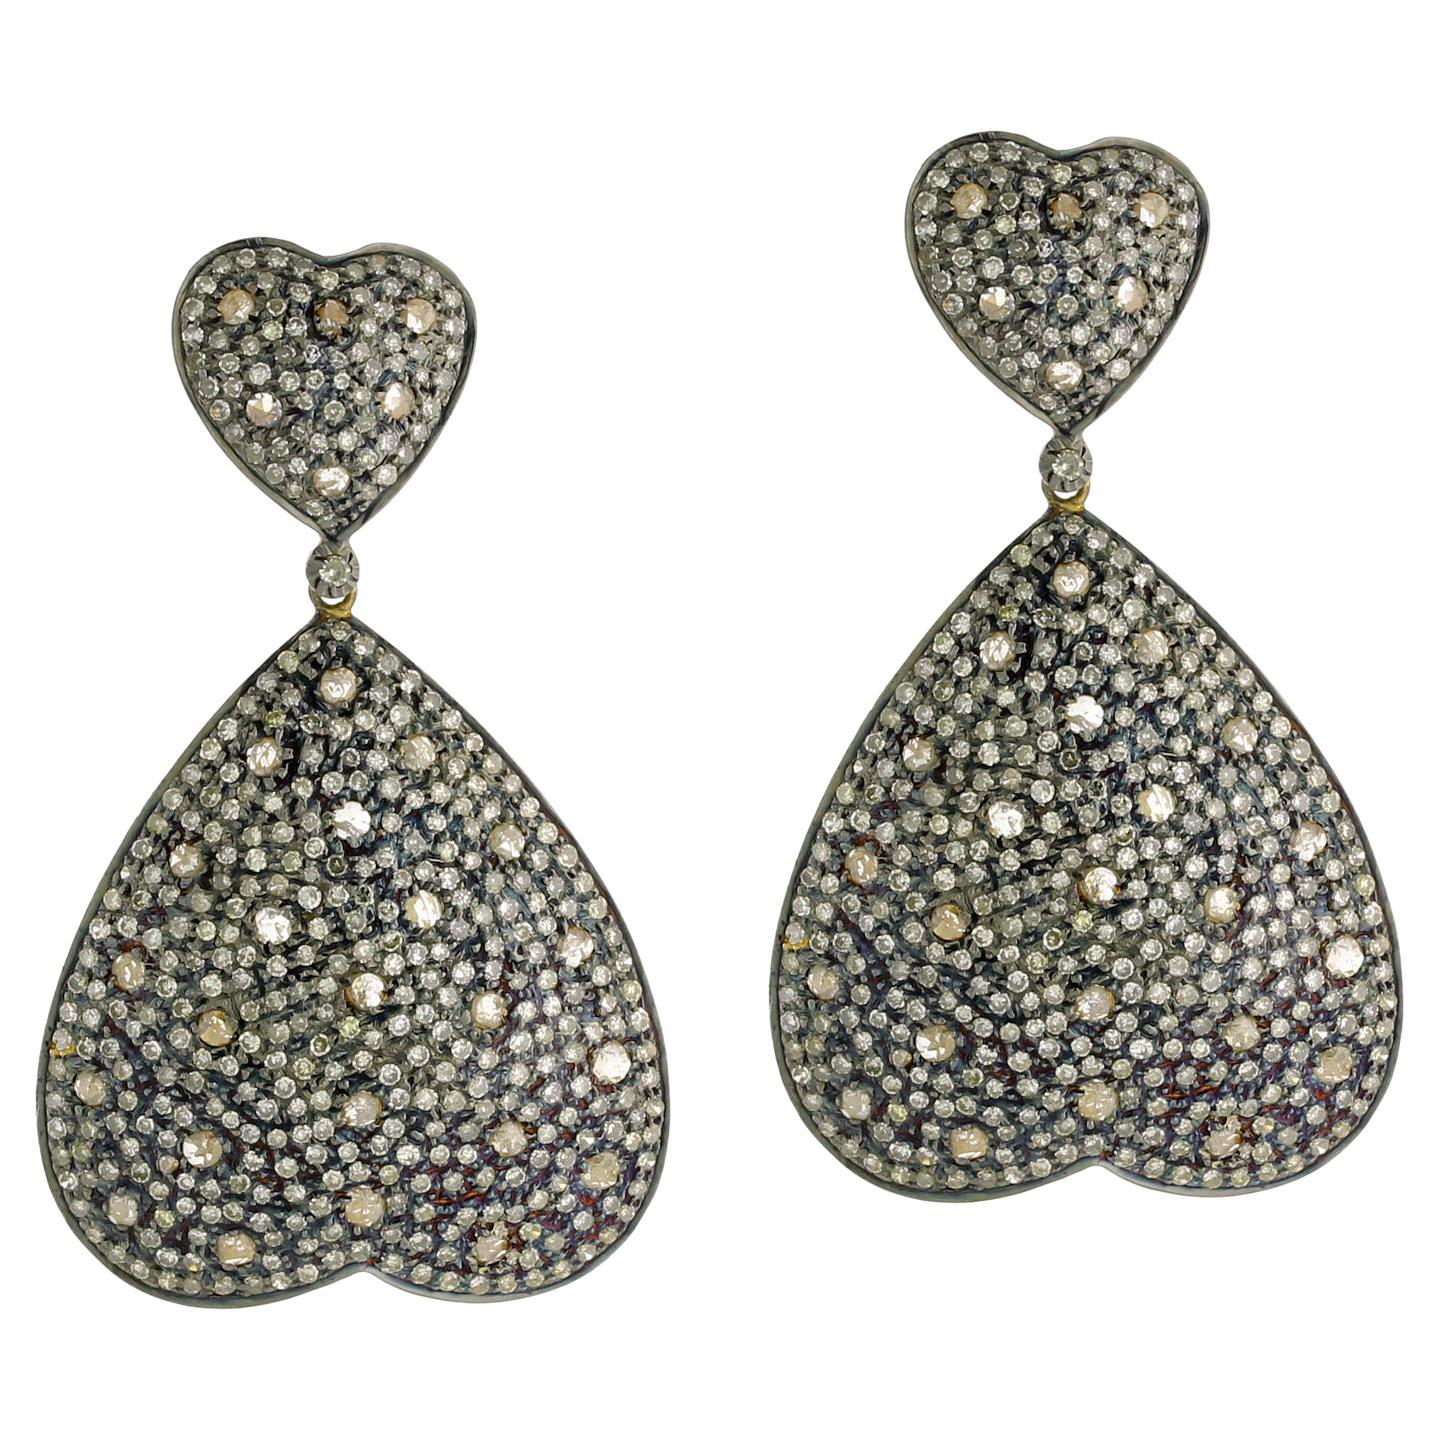 Heart Shaped Dangle Earrings with Pave Diamonds Made in Gold & Silver